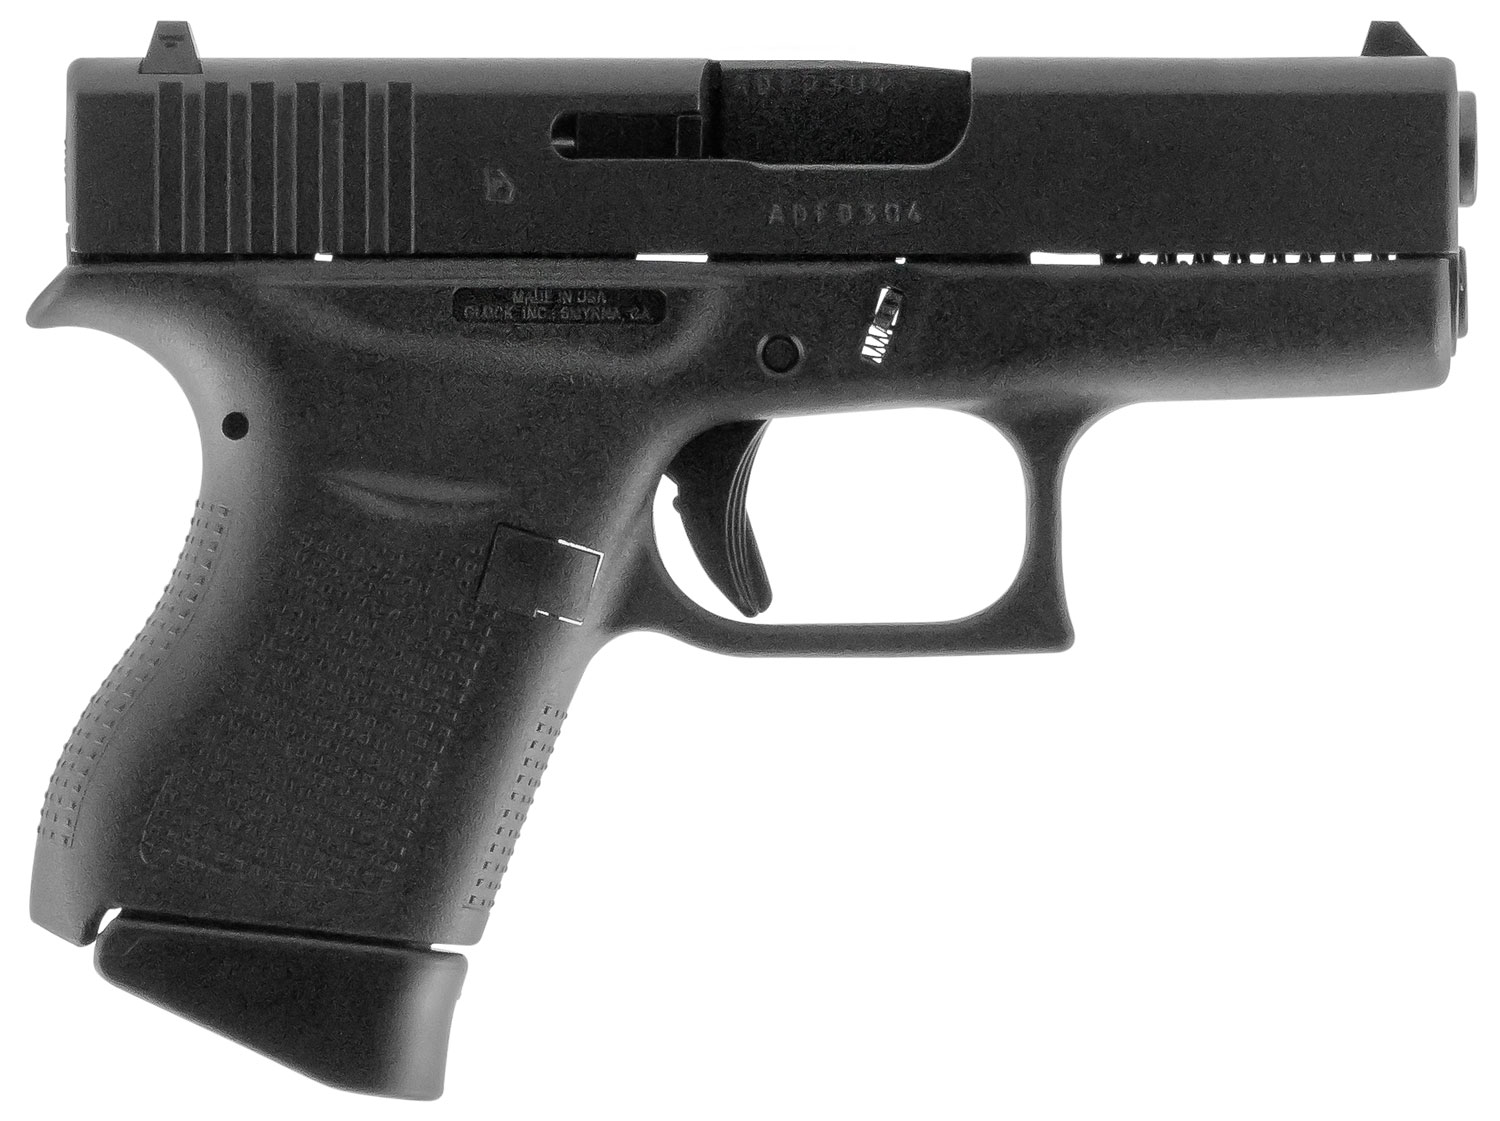 Glock UI4350201 G43 Subcompact 9mm Luger 3.39